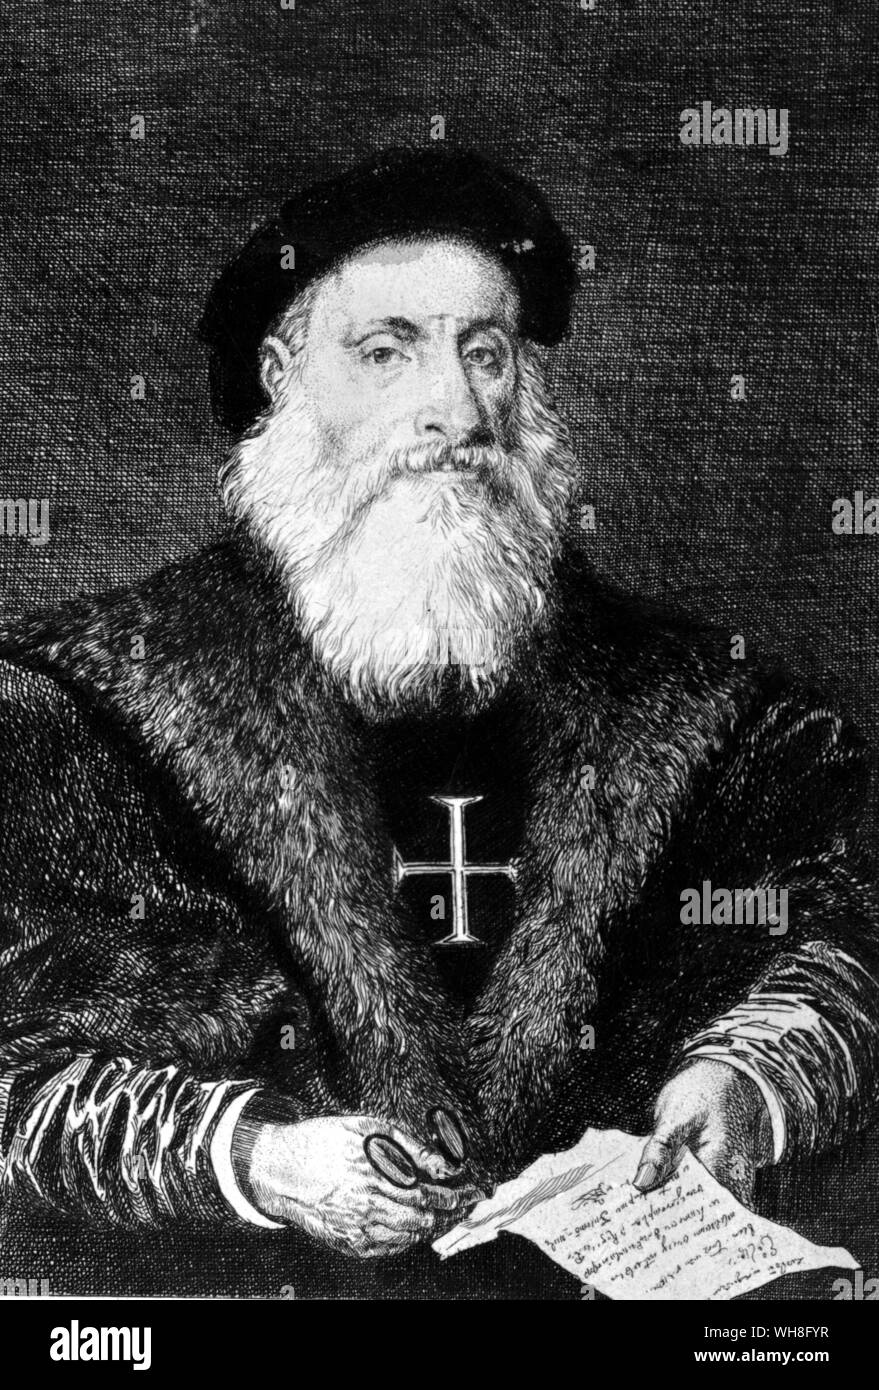 Vasco da Gama (1469-1524) was a Portuguese navigator and explorer, one of the most successful in the European Age of Discovery, and the first person to sail directly from Europe to India. In 1498 he made the first voyage from western Europe around Africa to the East. . . . . Stock Photo